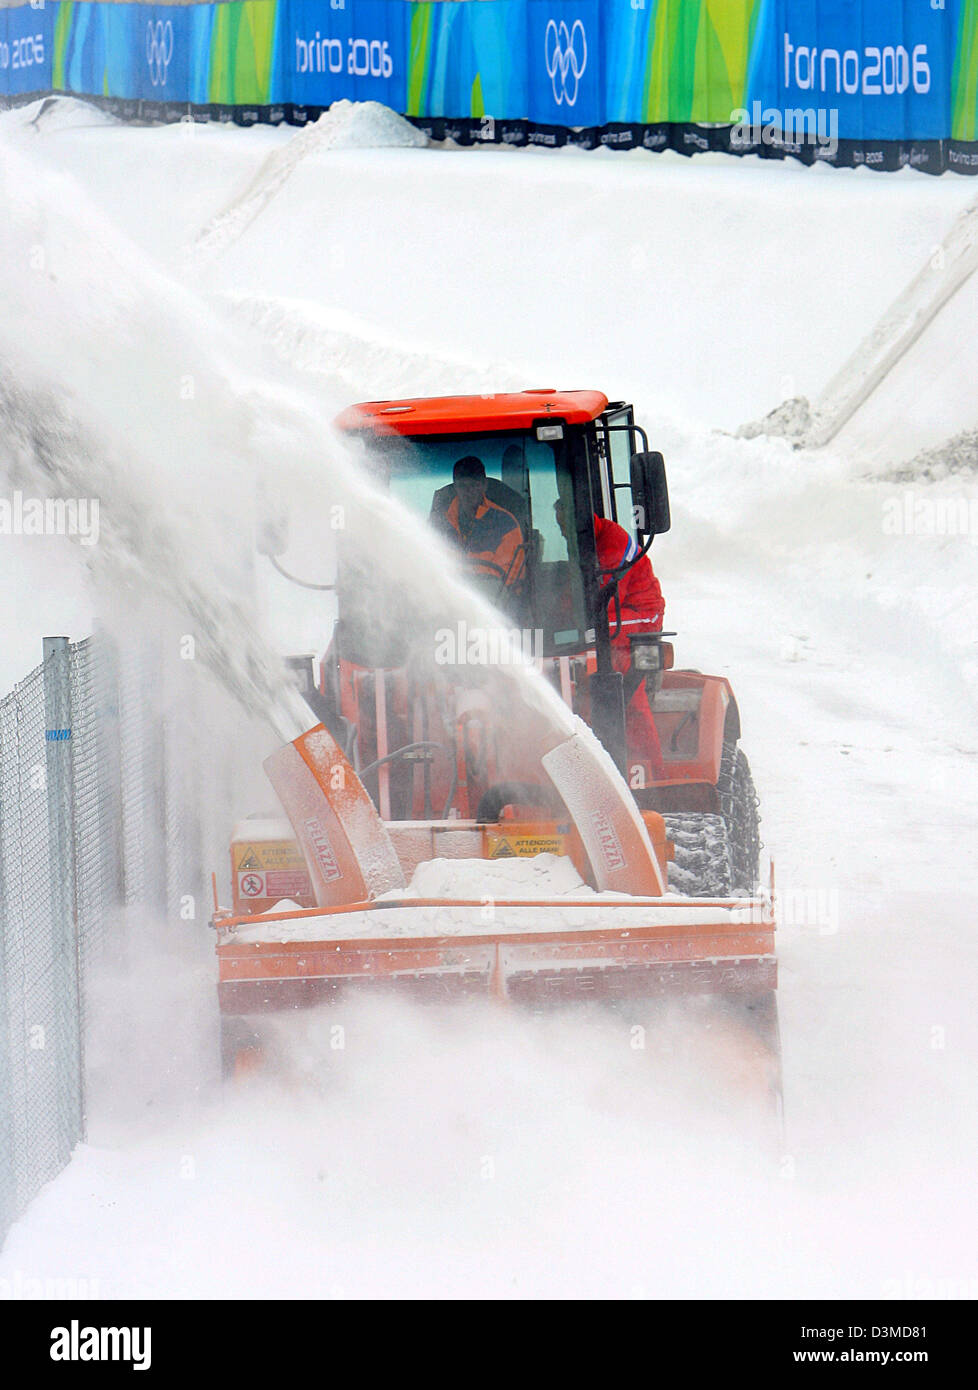 A snowblower clears the pathway for the spectators in Pragelato, Italy, Monday, 06 February 2006. The Olympic disciplines Nordic Combined and Ski Jumping are going to take place at this location from 10 February to 21 February. Final preparations are underway for the opening of the XX Winter Olympics on 10 February. Photo: Arne Dedert Stock Photo